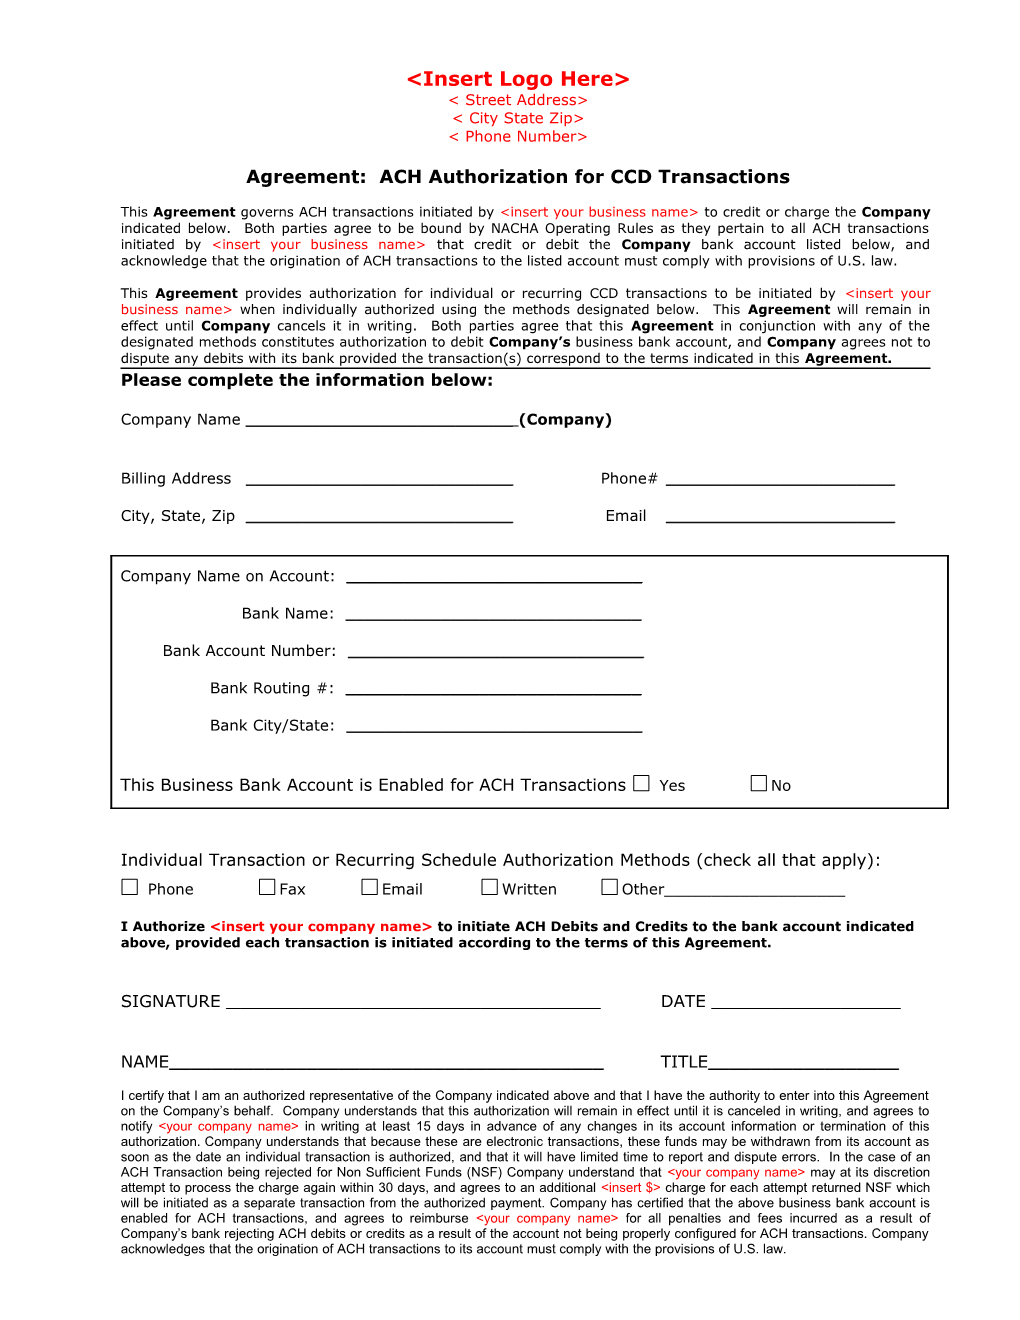 Agreement: ACH Authorization for CCD Transactions One Account